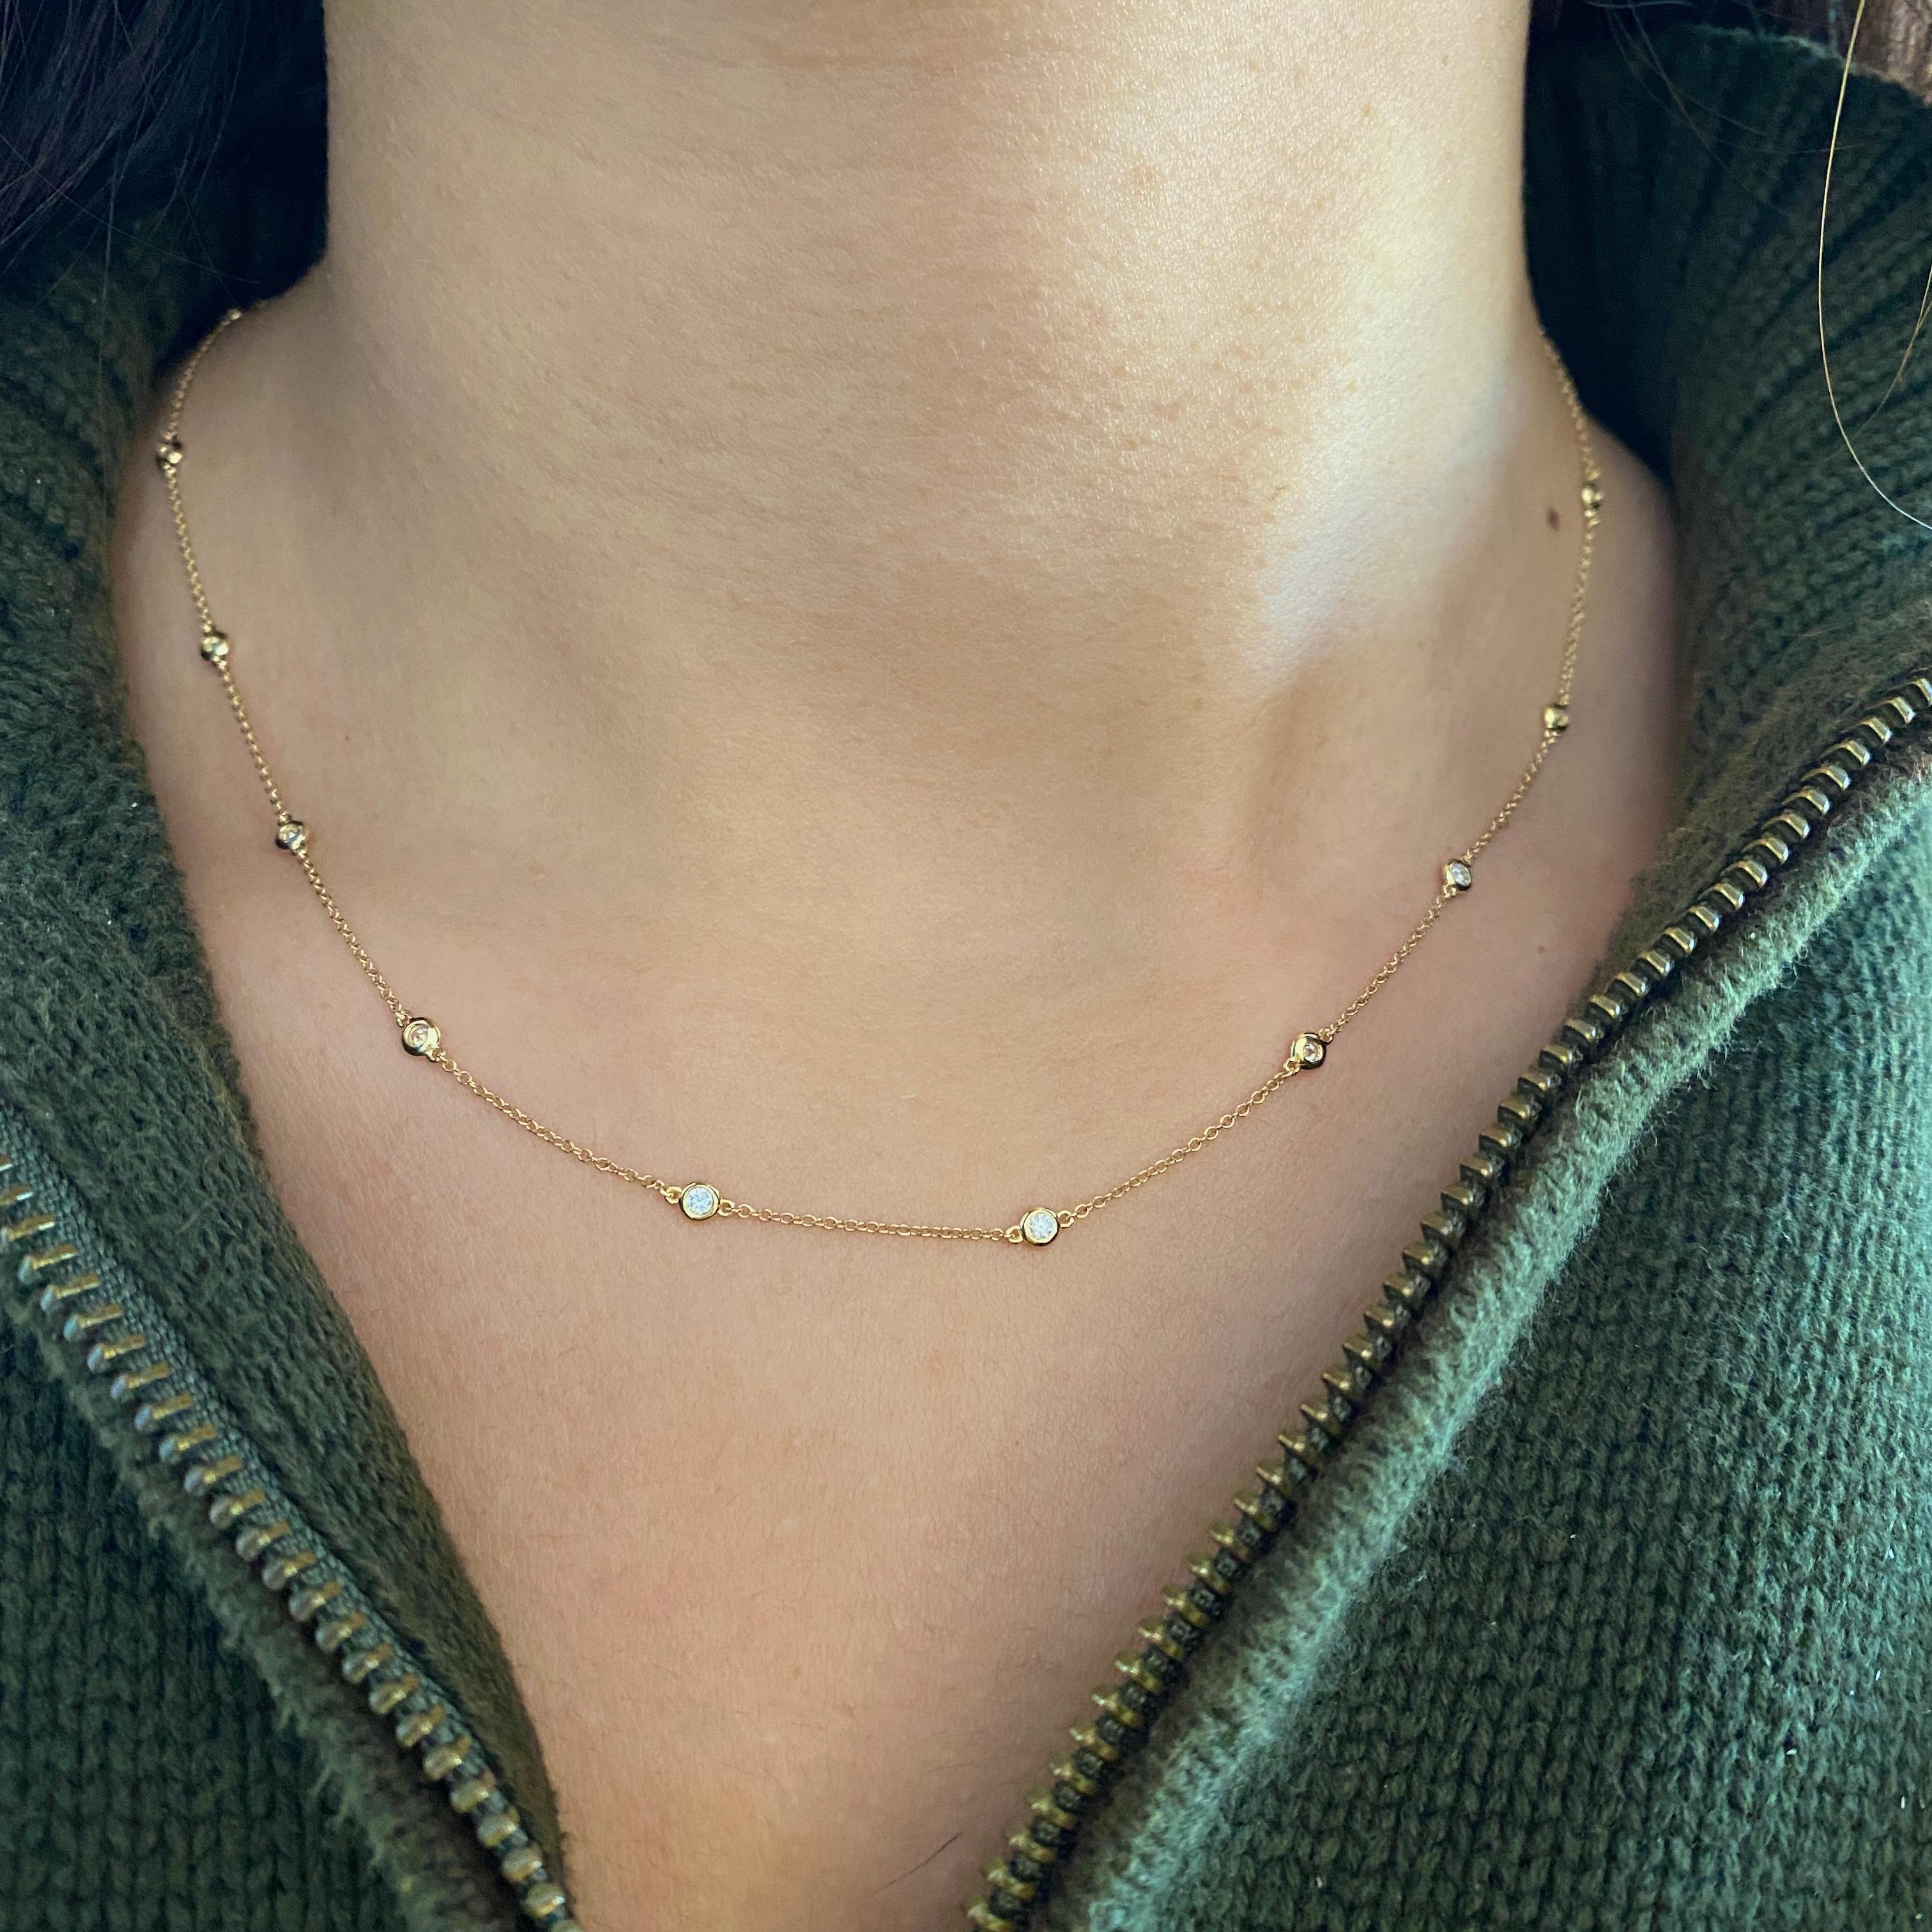 Contemporary Eight Diamonds Necklace Diamonds by the Yard Necklace in 14K Yellow Gold